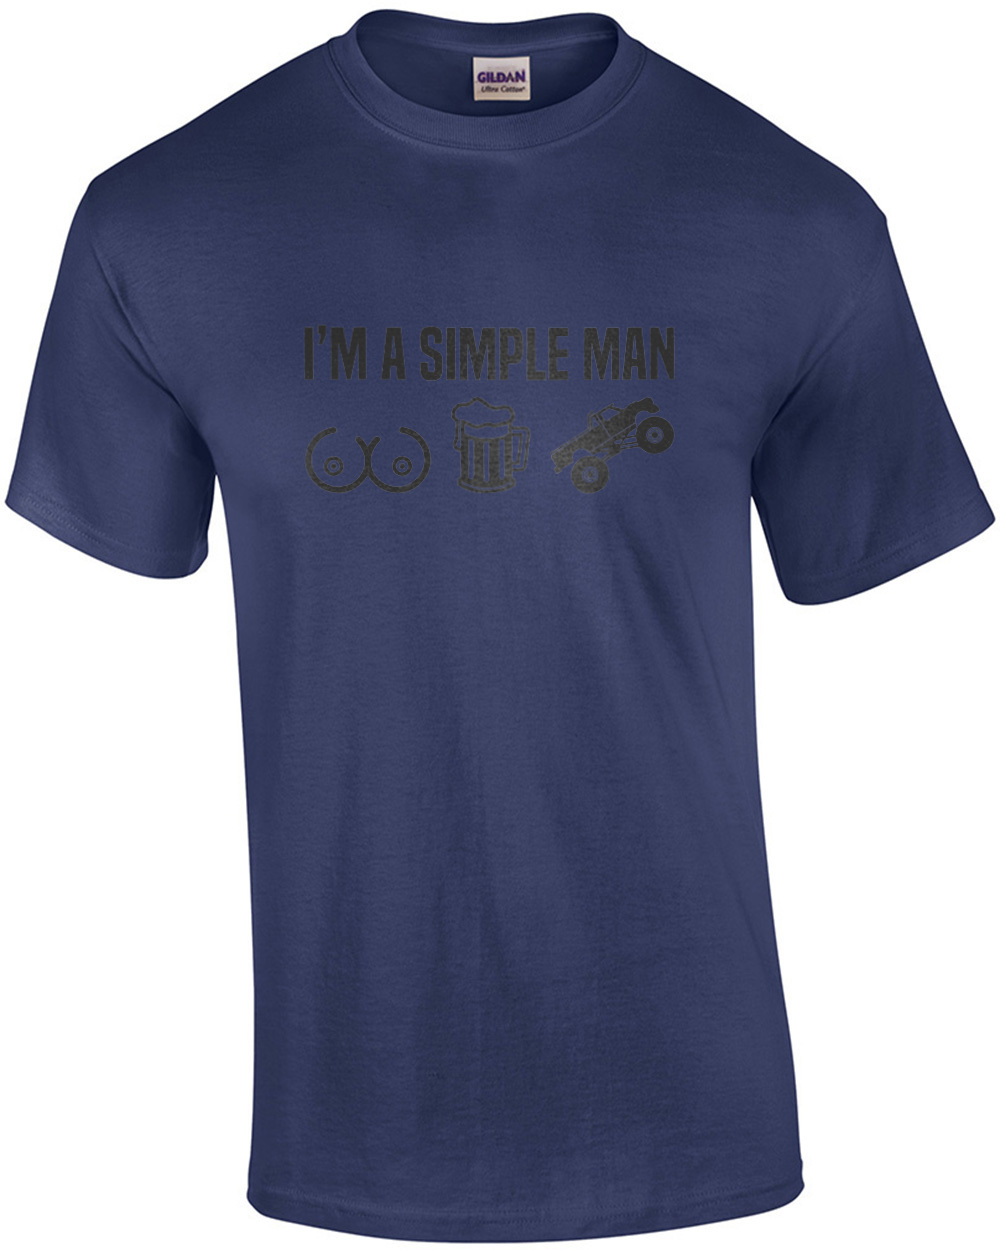 I'm a simple man - breasts, beer, and trucks - funny t-shirt